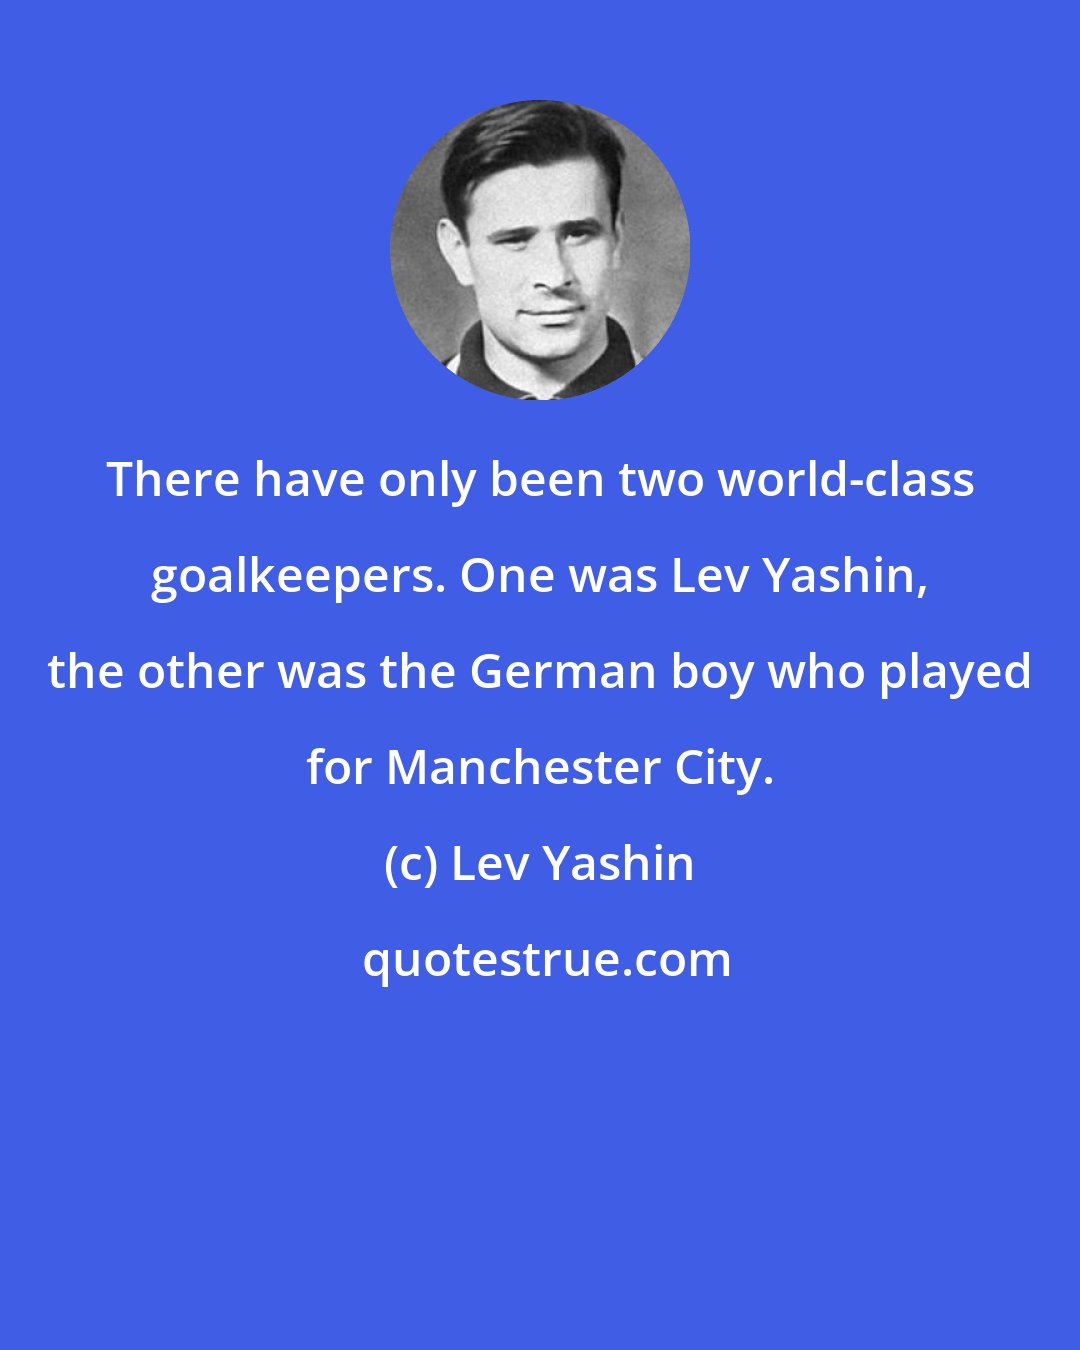 Lev Yashin: There have only been two world-class goalkeepers. One was Lev Yashin, the other was the German boy who played for Manchester City.